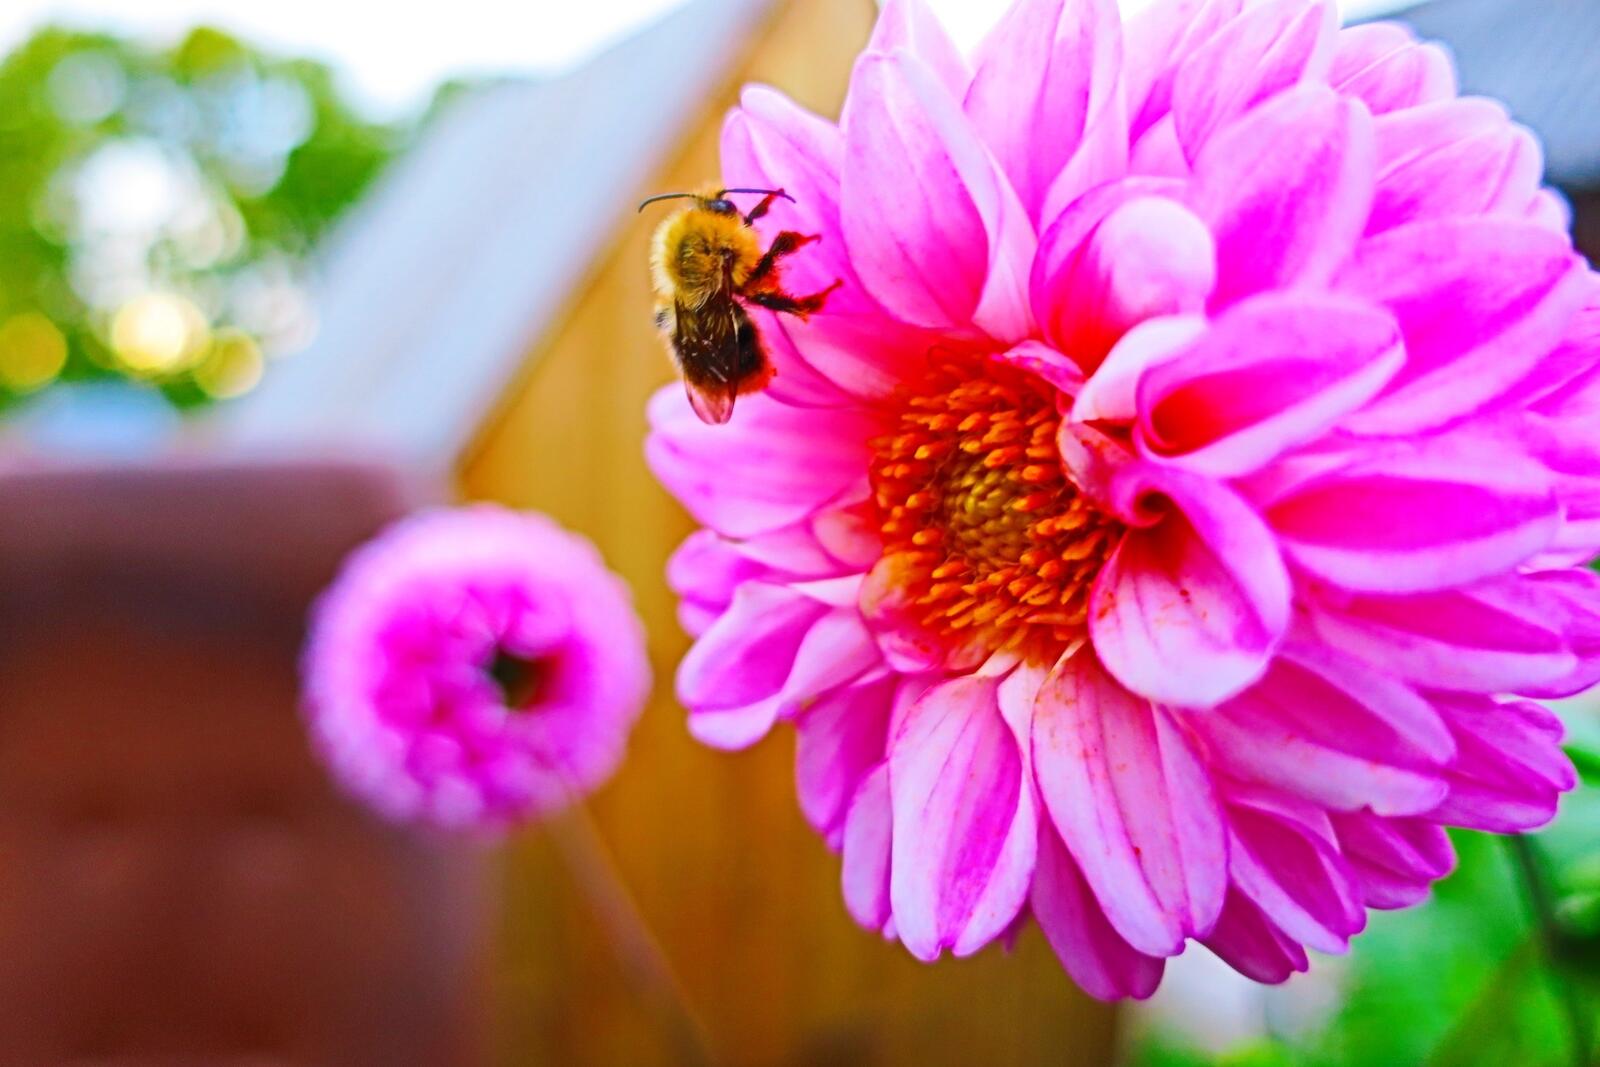 Wallpapers pink flower bee close on the desktop